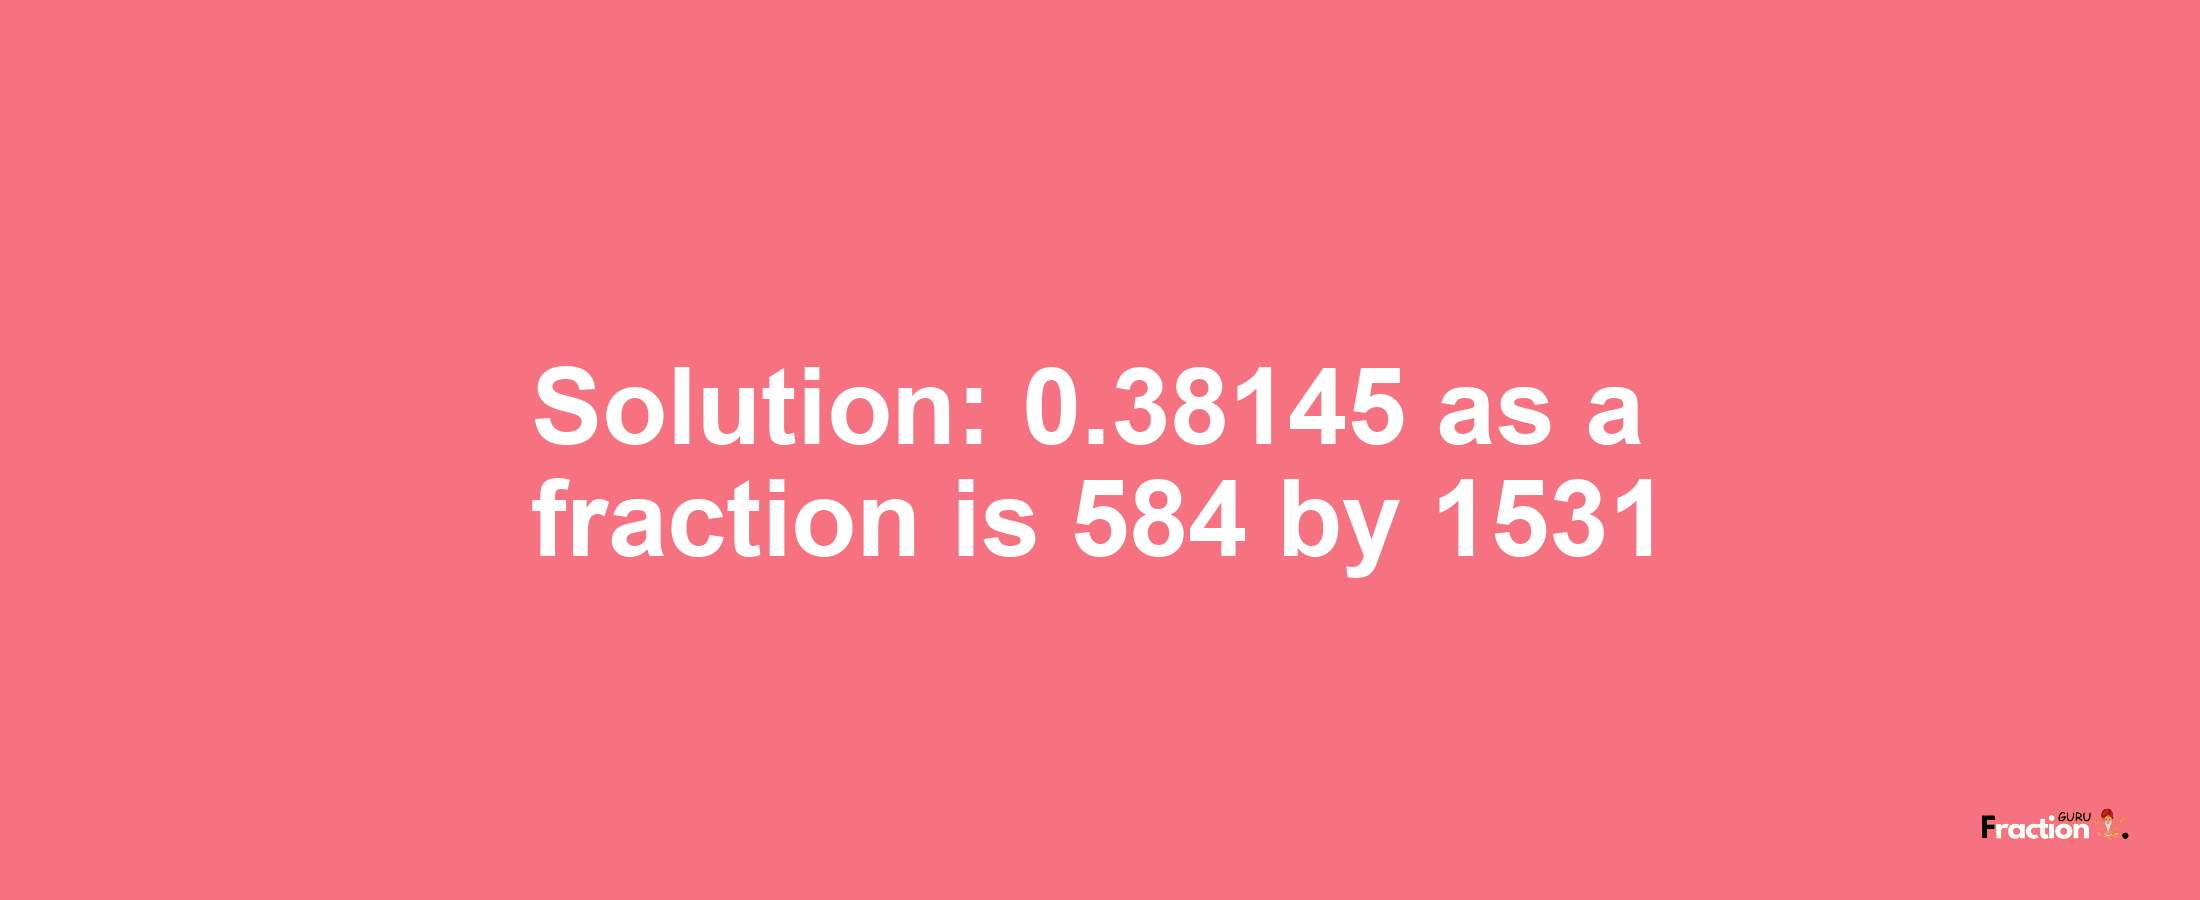 Solution:0.38145 as a fraction is 584/1531